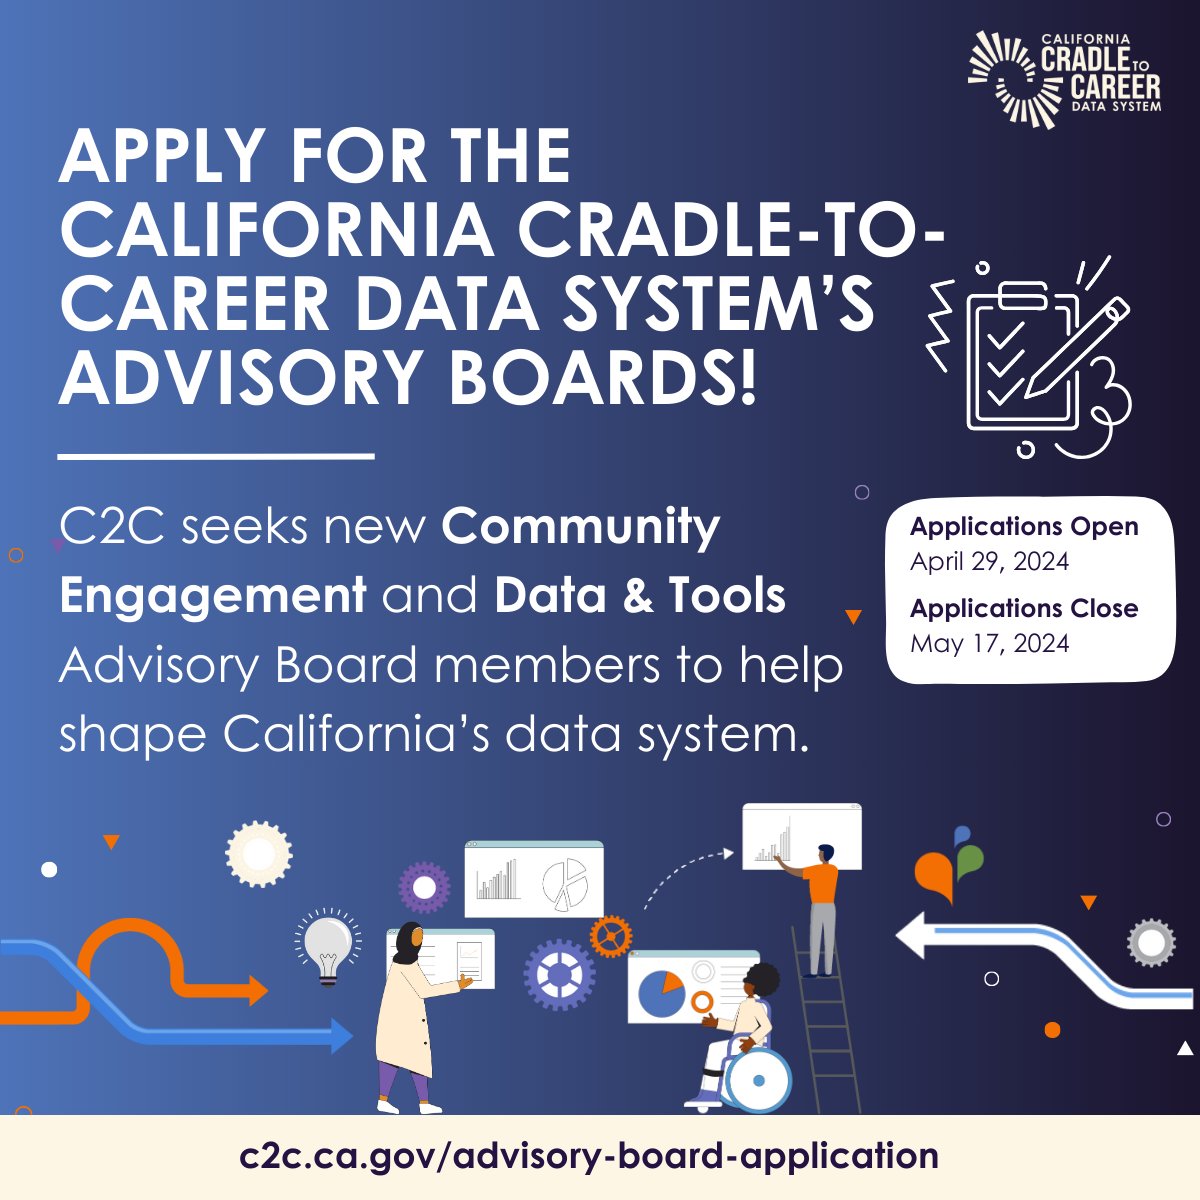 📣Applications are now open for Cradle-to-Career's Community Engagement and Data & Tools Advisory Boards!

For more information and to apply, visit: 
c2c.ca.gov/advisory-board…

Deadline to apply: May 17, 2024.

#CommunityEngagement #DataTools